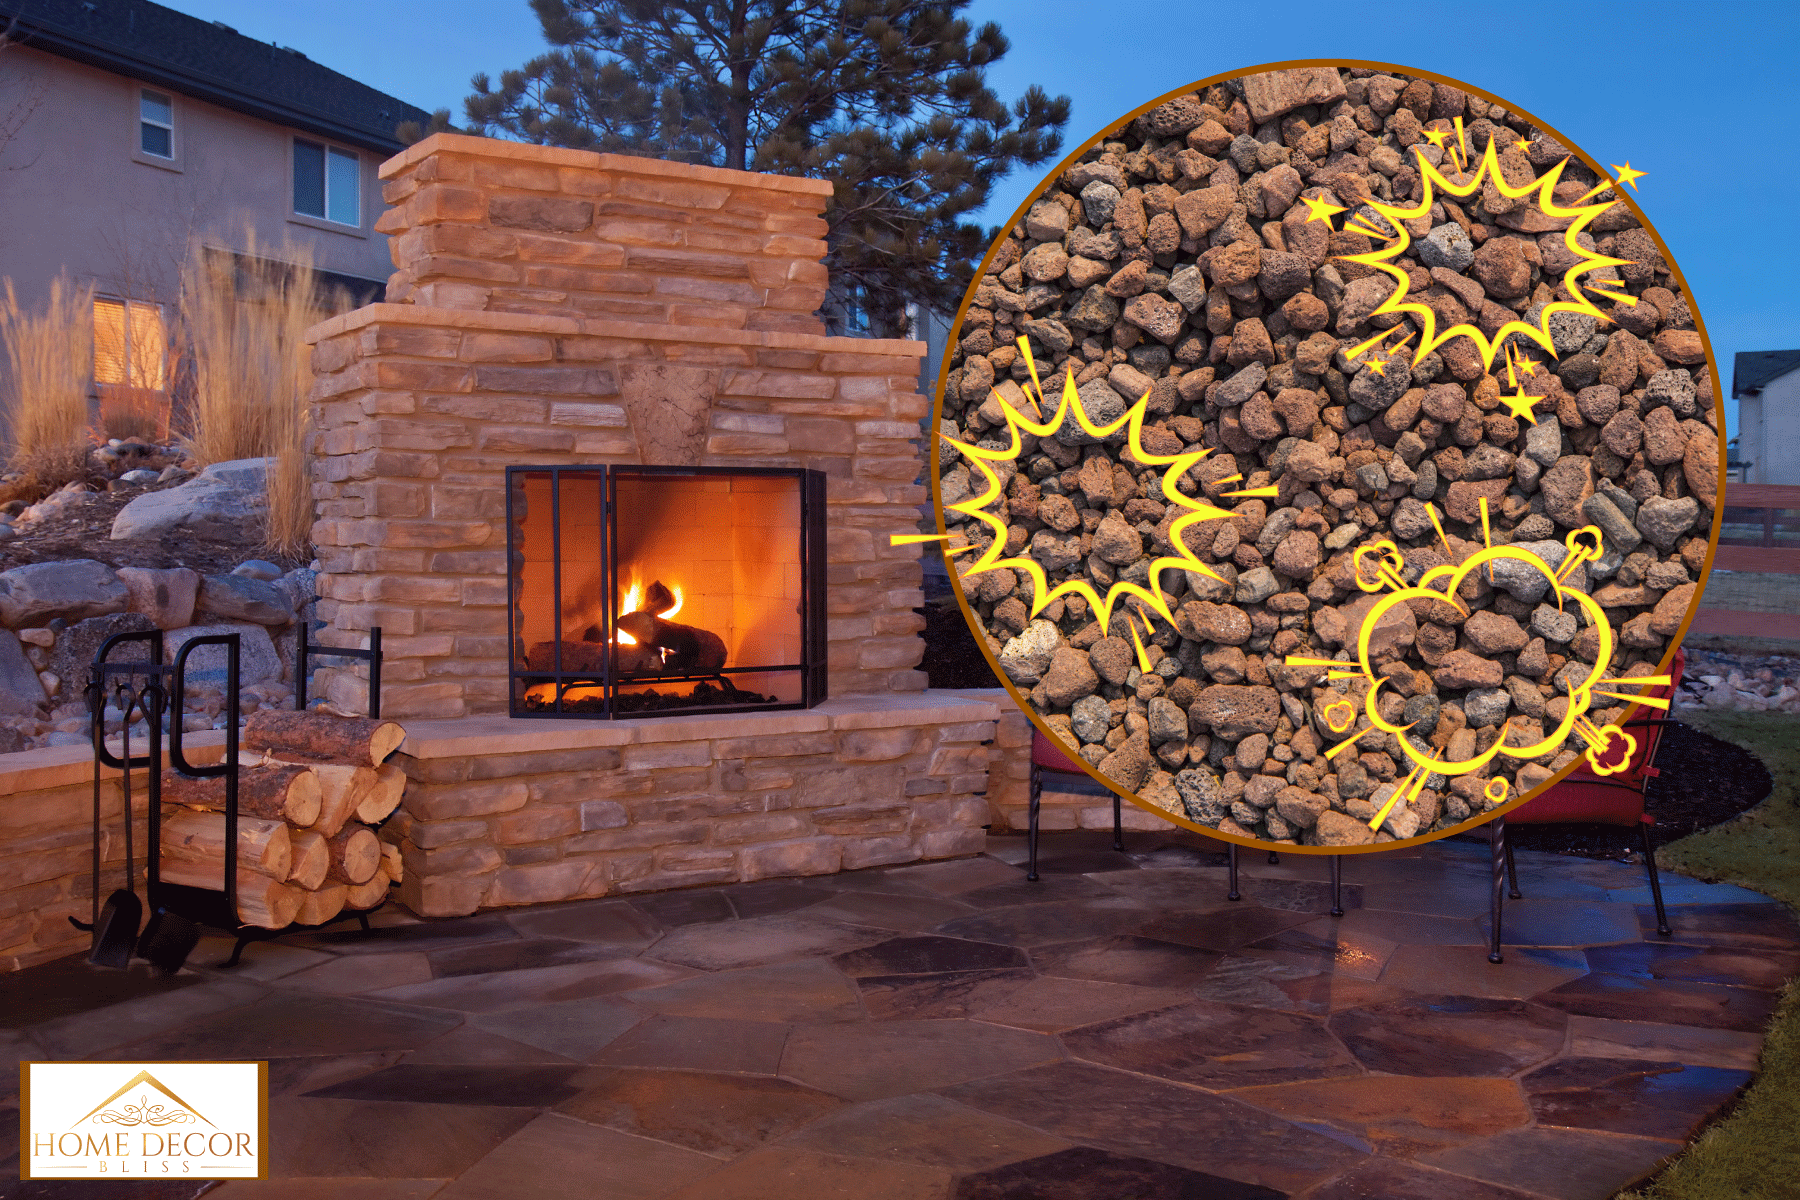 A tall fireplace with firewood's on the side, Why Are My Lava Rocks Popping?